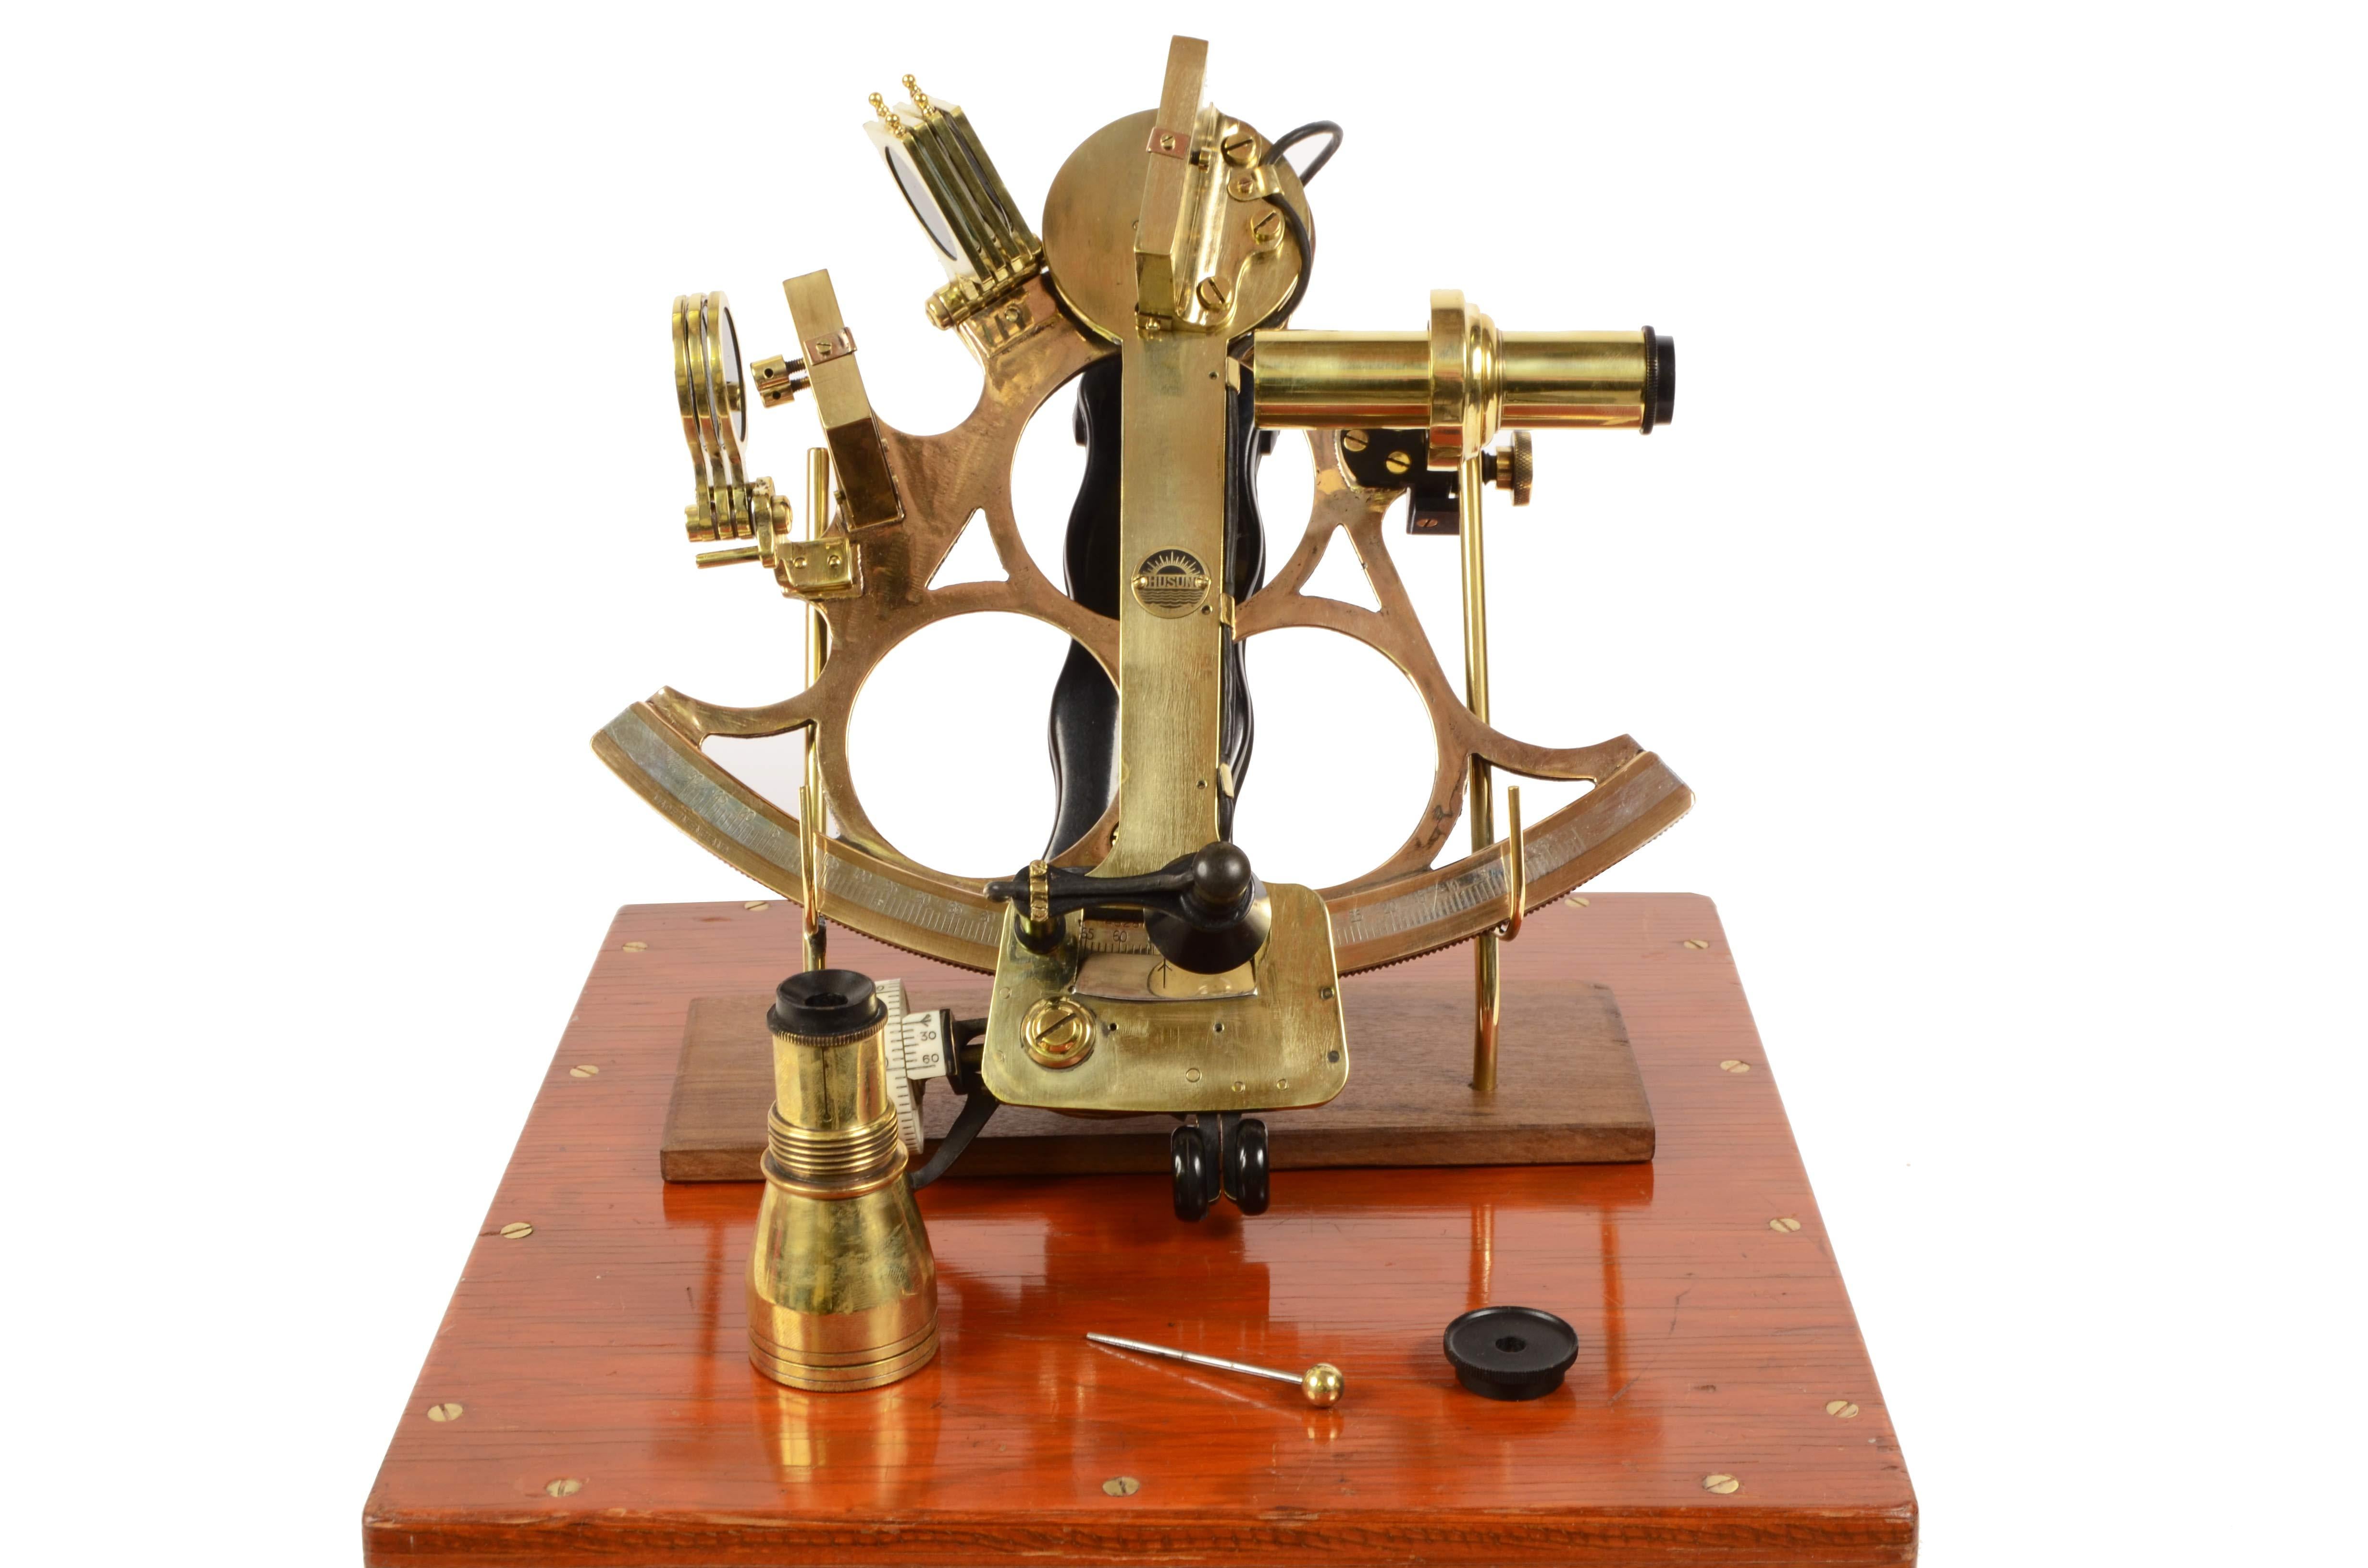 1930s Brass sextant signed Husun Trade Mark and made by H. Hughes & Son Ltd, a company active for about 250 years and specialized in the production of nautical instruments; instrument complete with optics and placed in an elegant original square